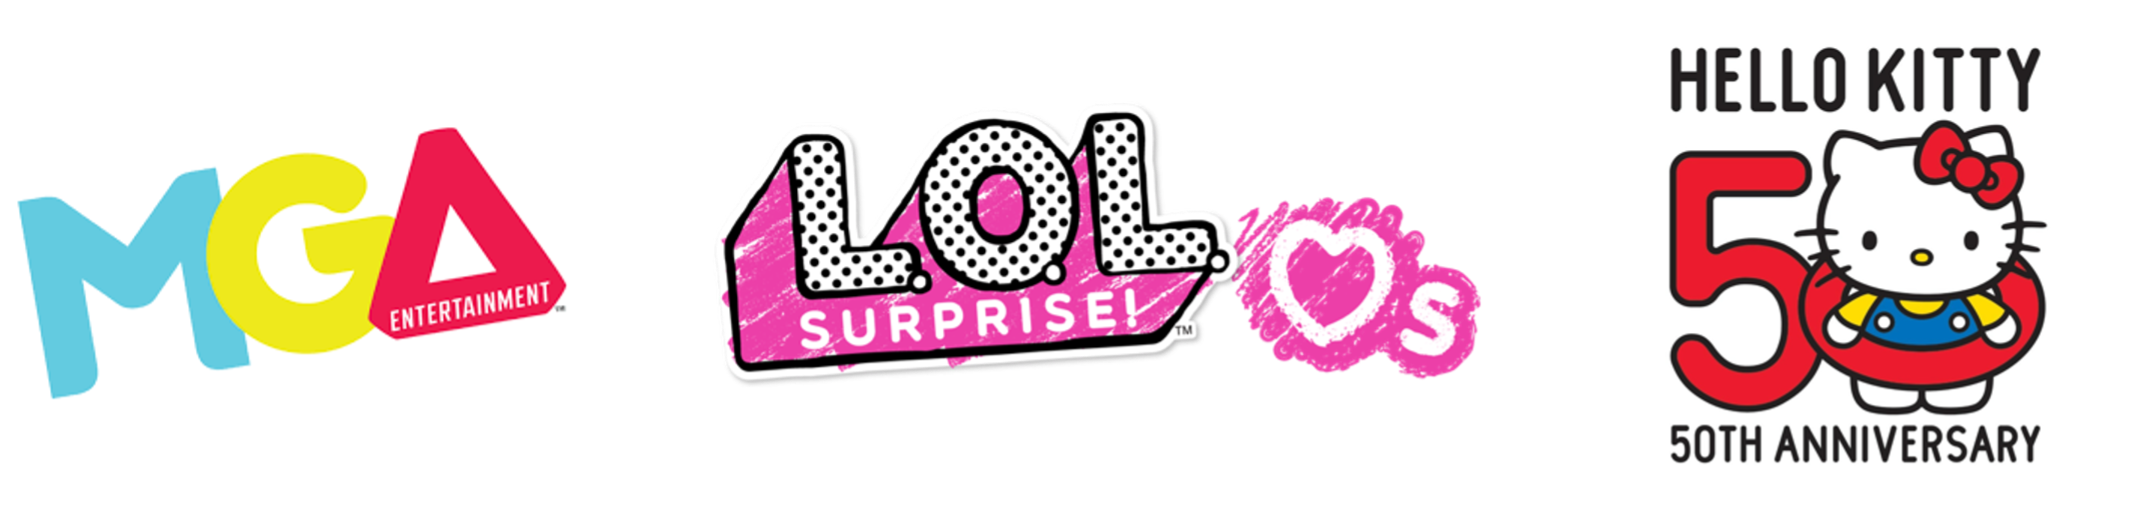 L.O.L. Surprise!™ Celebrates the 50th Anniversary of Hello Kitty® with a  Limited-Edition Collection of Tot Dolls